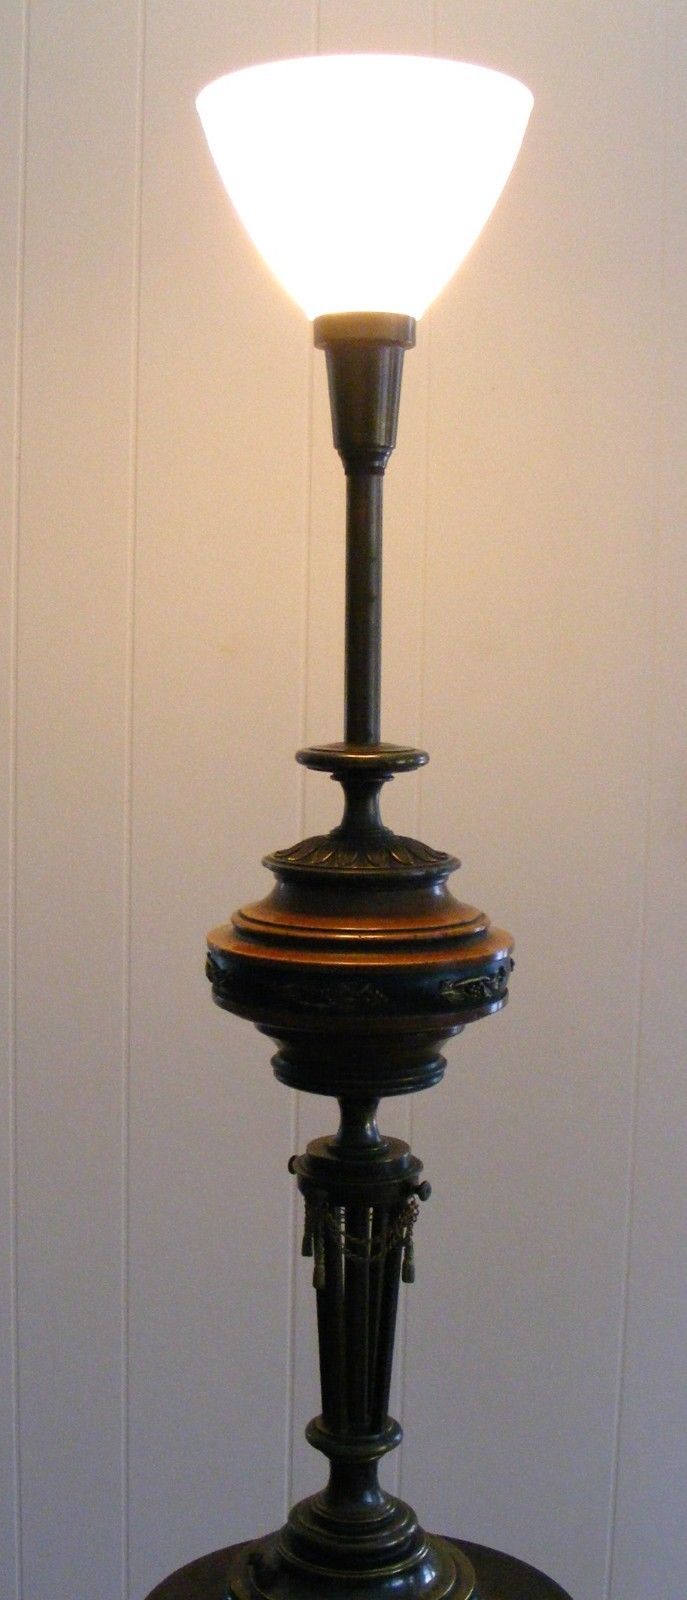 NICE VINTAGE STIFFEL TORCHIERE TABLE LAMP WITH ORIGINAL  MILK GLASS DIFFUSER